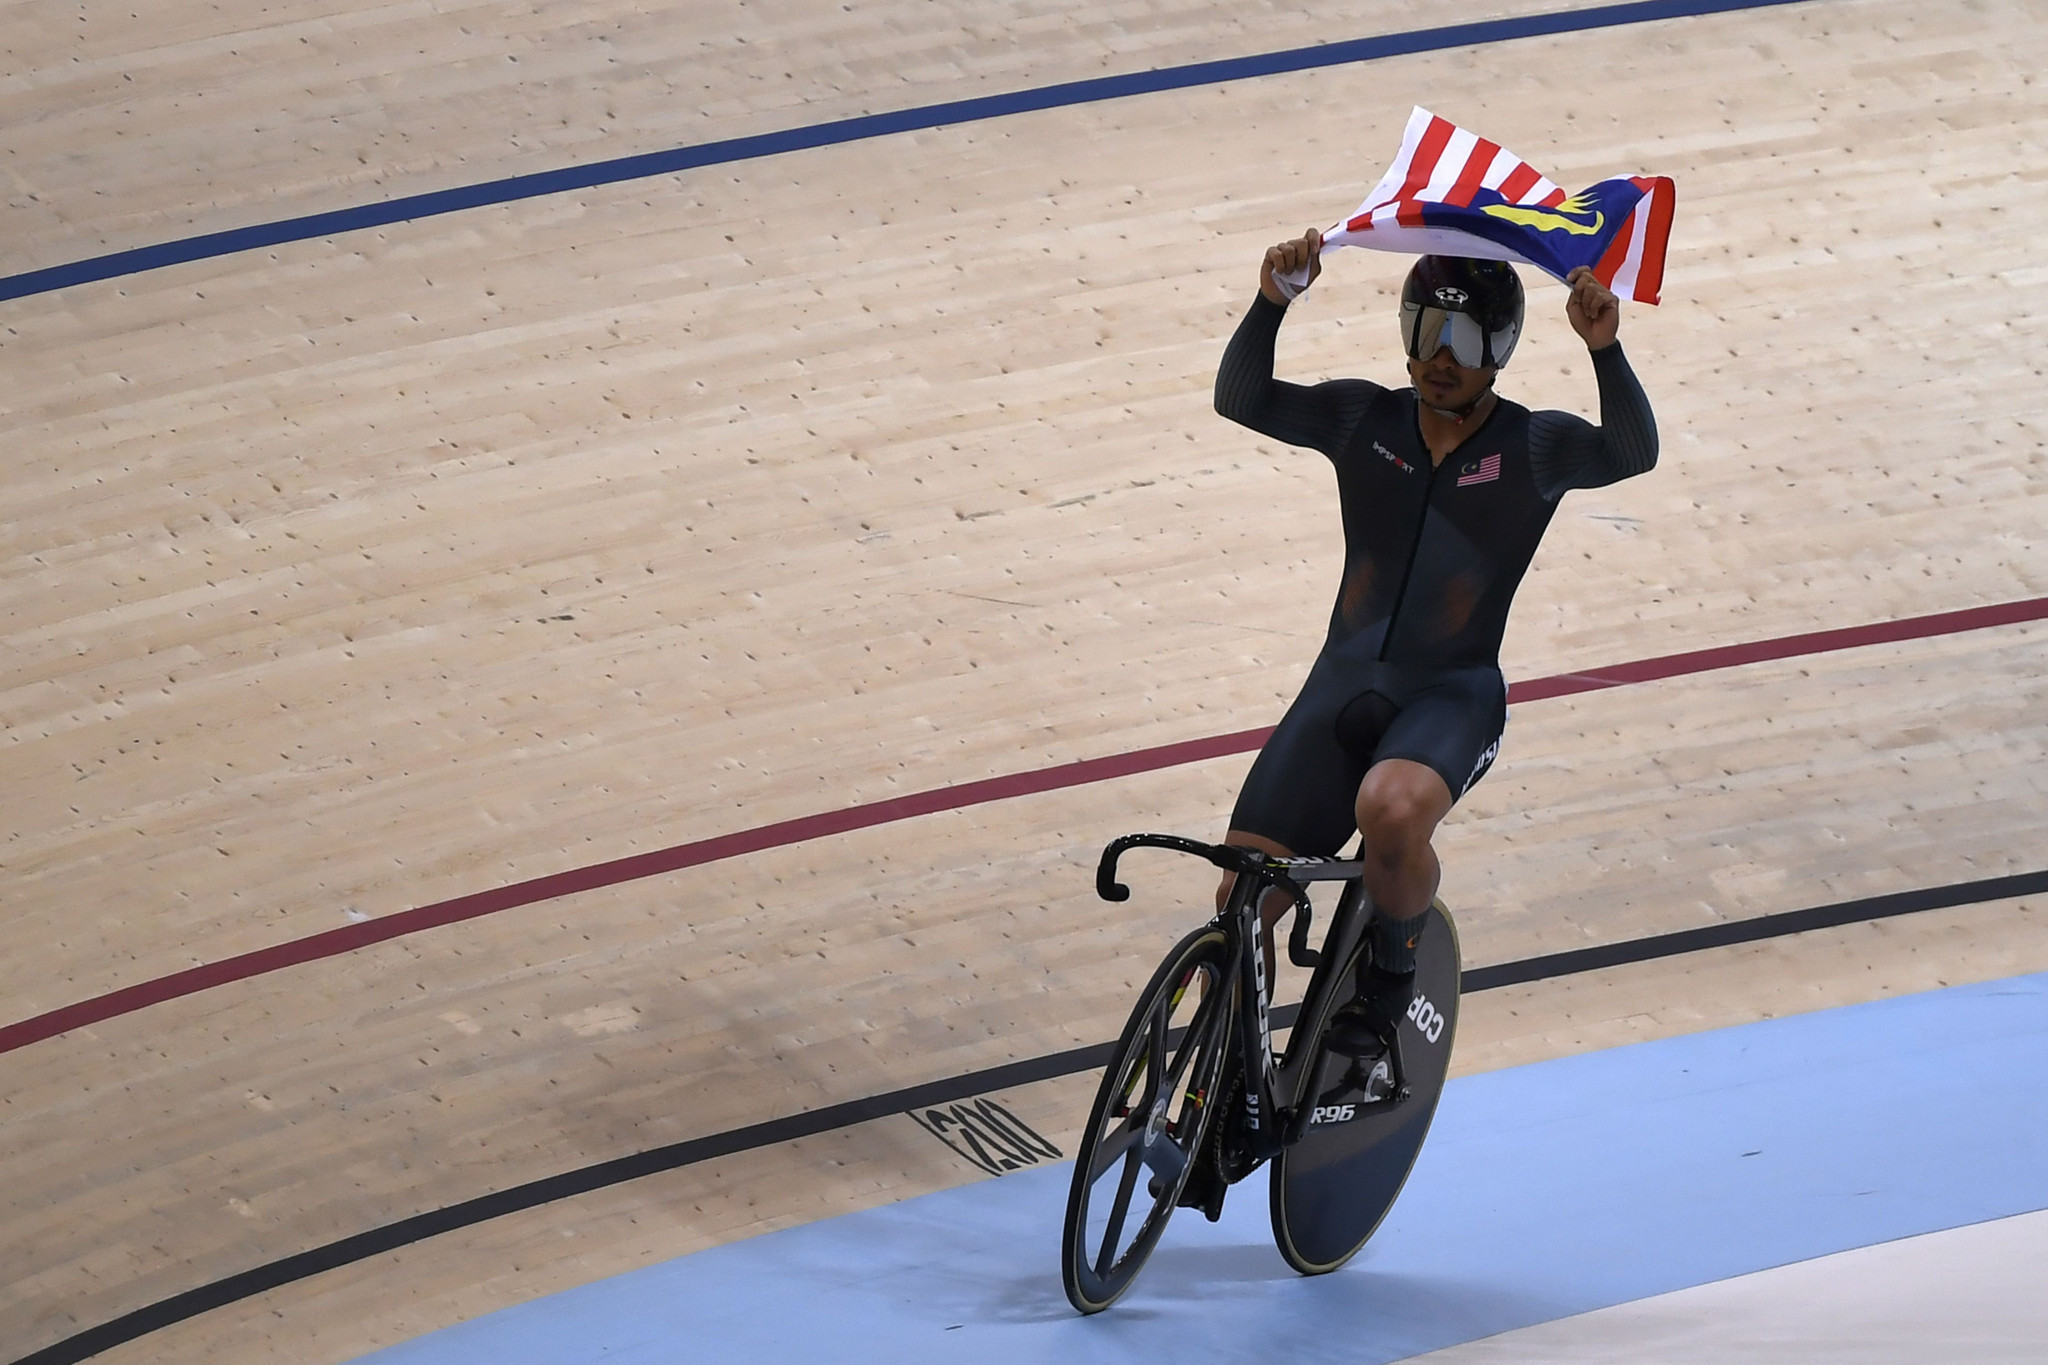 Malaysia's Mohd Azizulhasni Awang triumphed in the men's sprint track cycling event as Japan failed to take the gold medal for only the third time in 60 years ©Getty Images